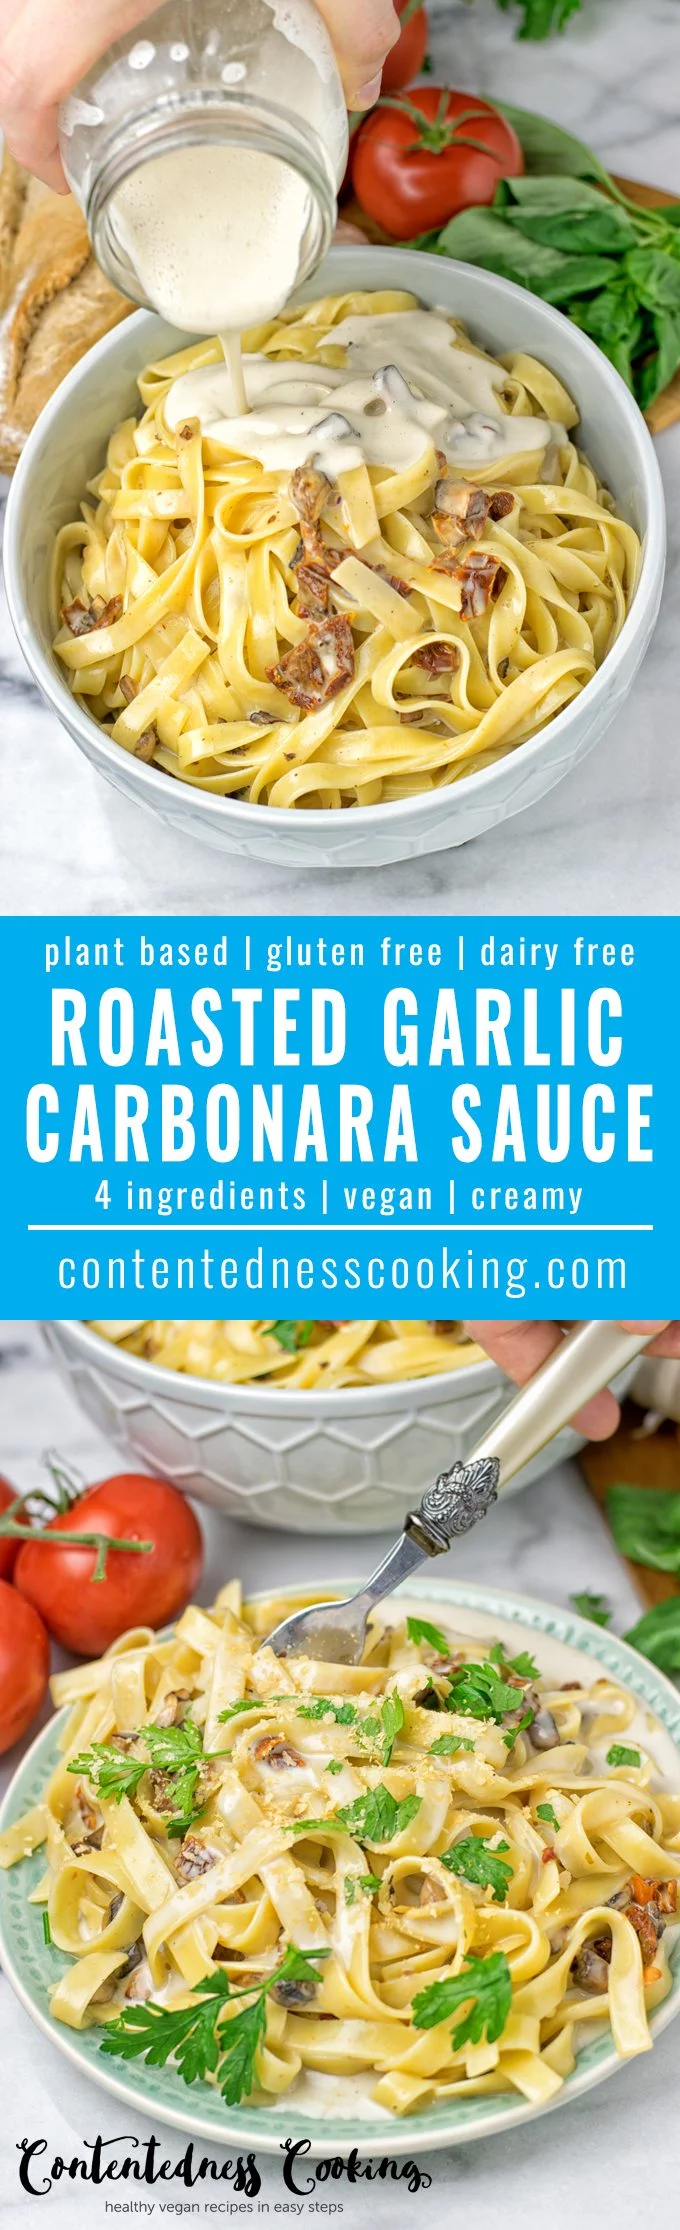 Collage of two pictures of the Roasted Garlic Carbonara Sauce with recipe title text.